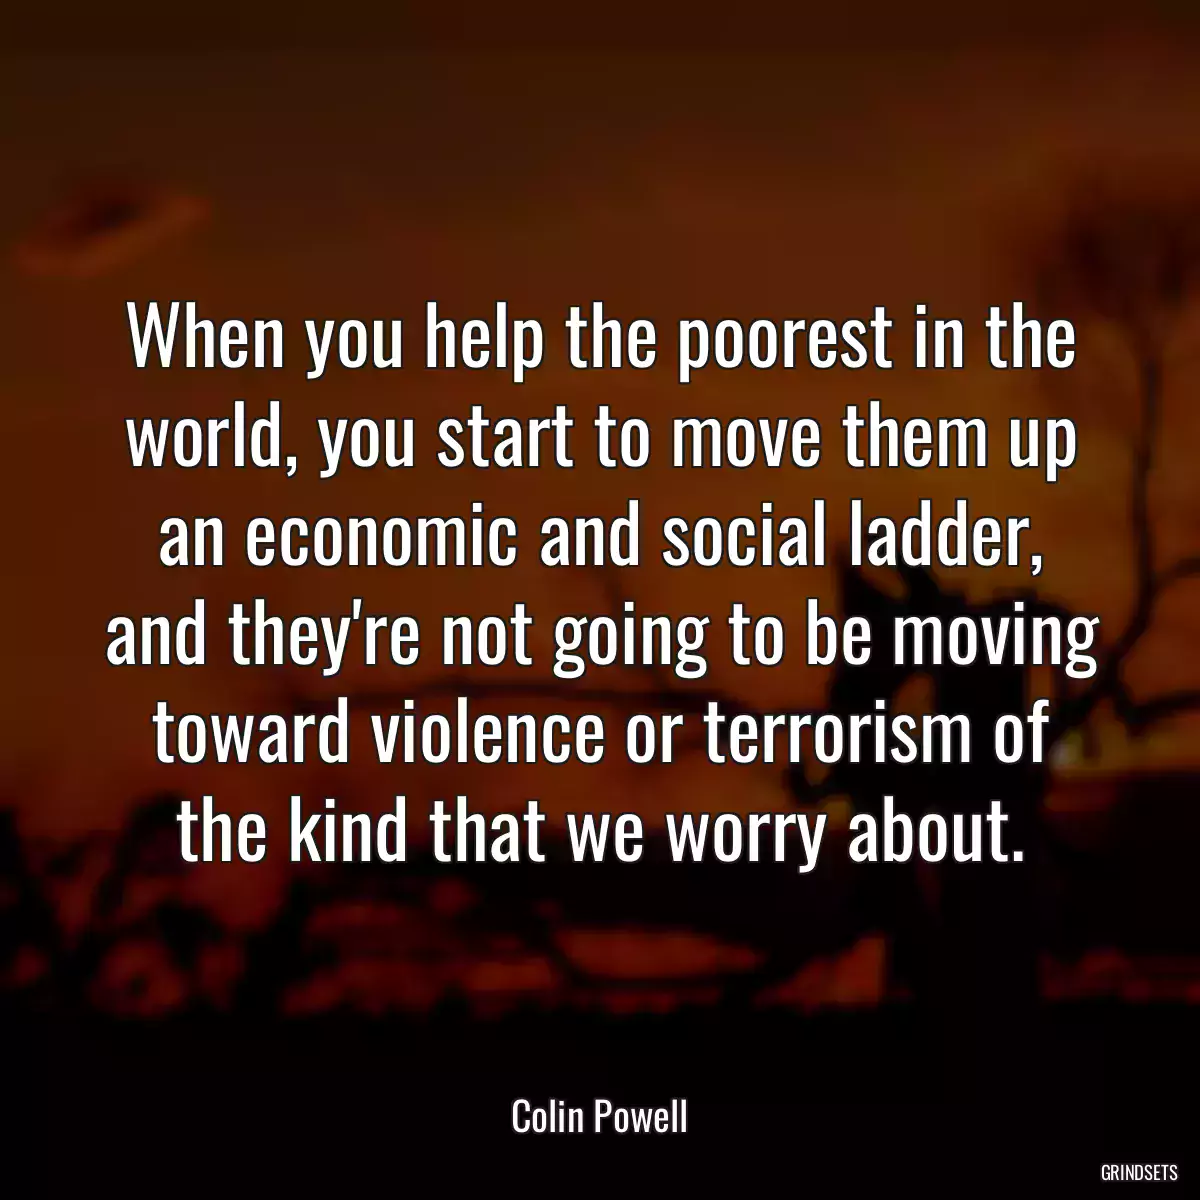 When you help the poorest in the world, you start to move them up an economic and social ladder, and they\'re not going to be moving toward violence or terrorism of the kind that we worry about.